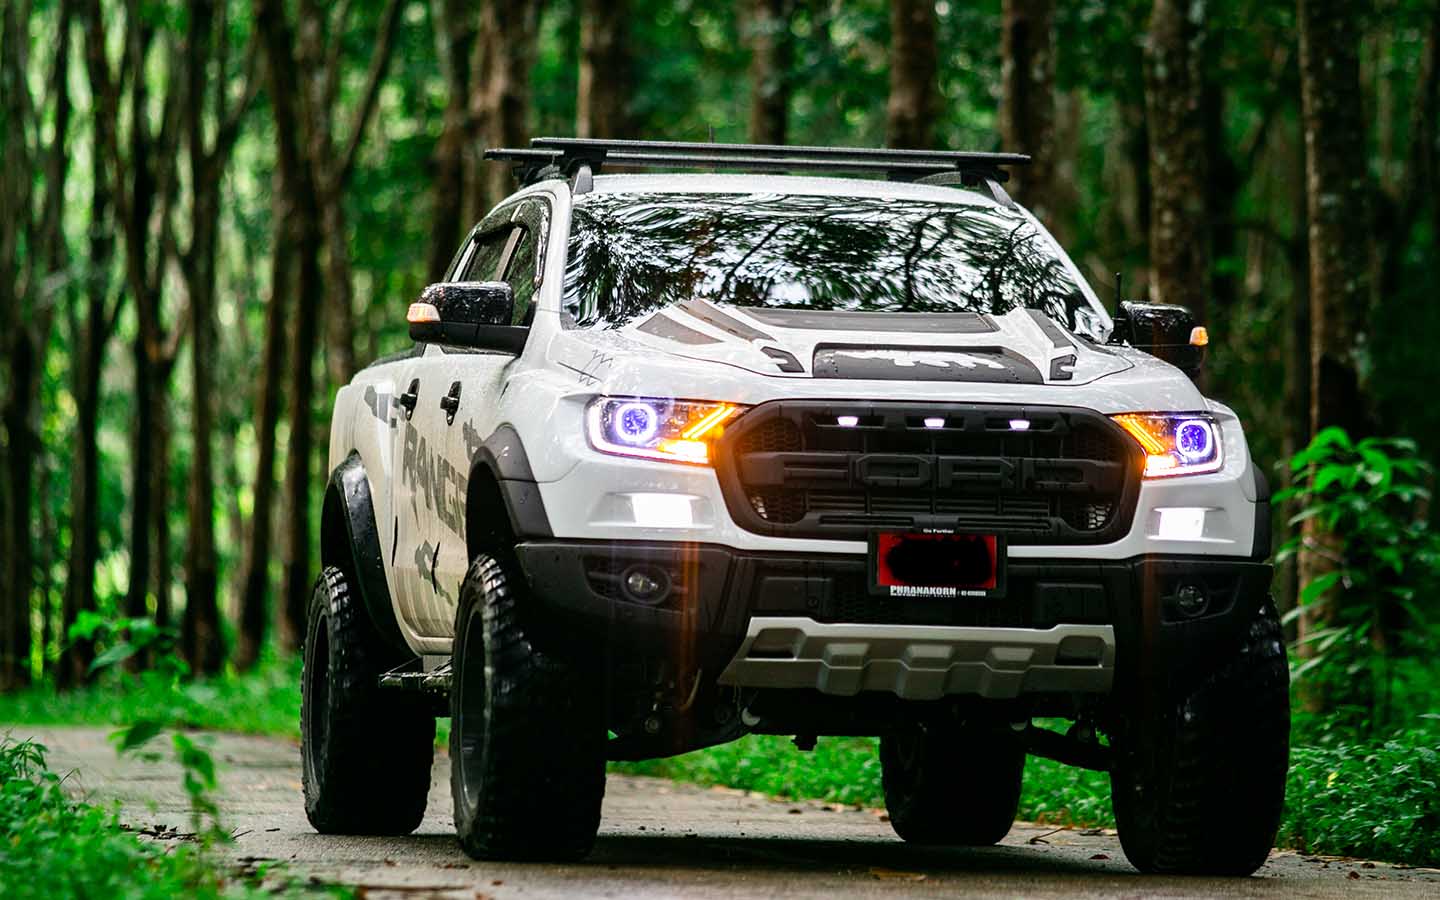 for off roading adventures, a 4wd vehicle is the right choice